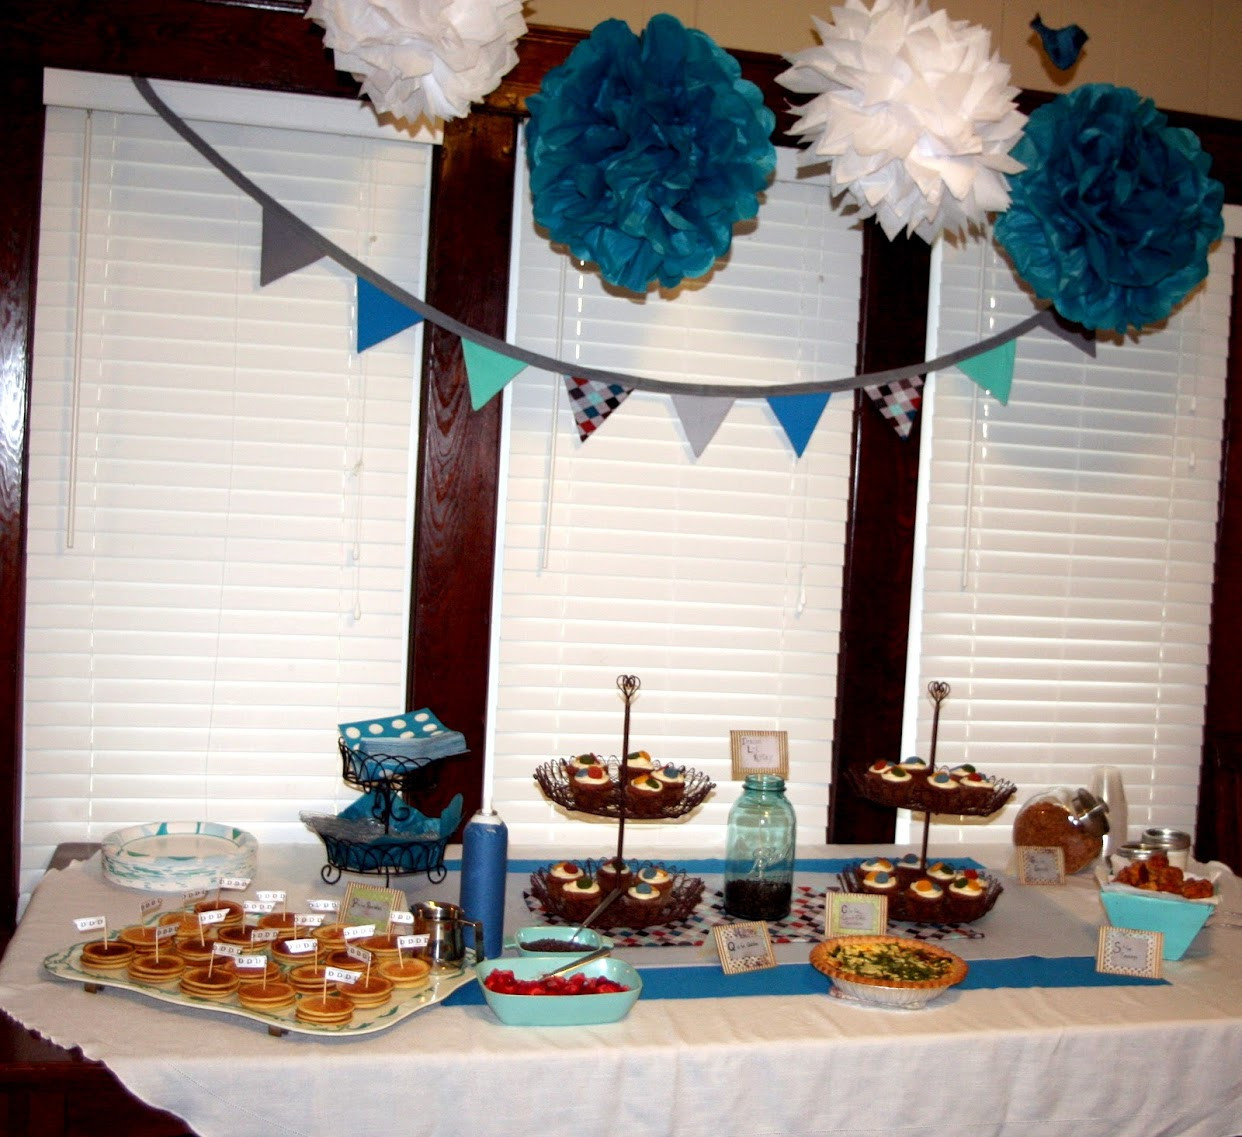 Baby Shower Decorating Ideas For A Boy
 Baby Shower Decorations For Boys Ideas